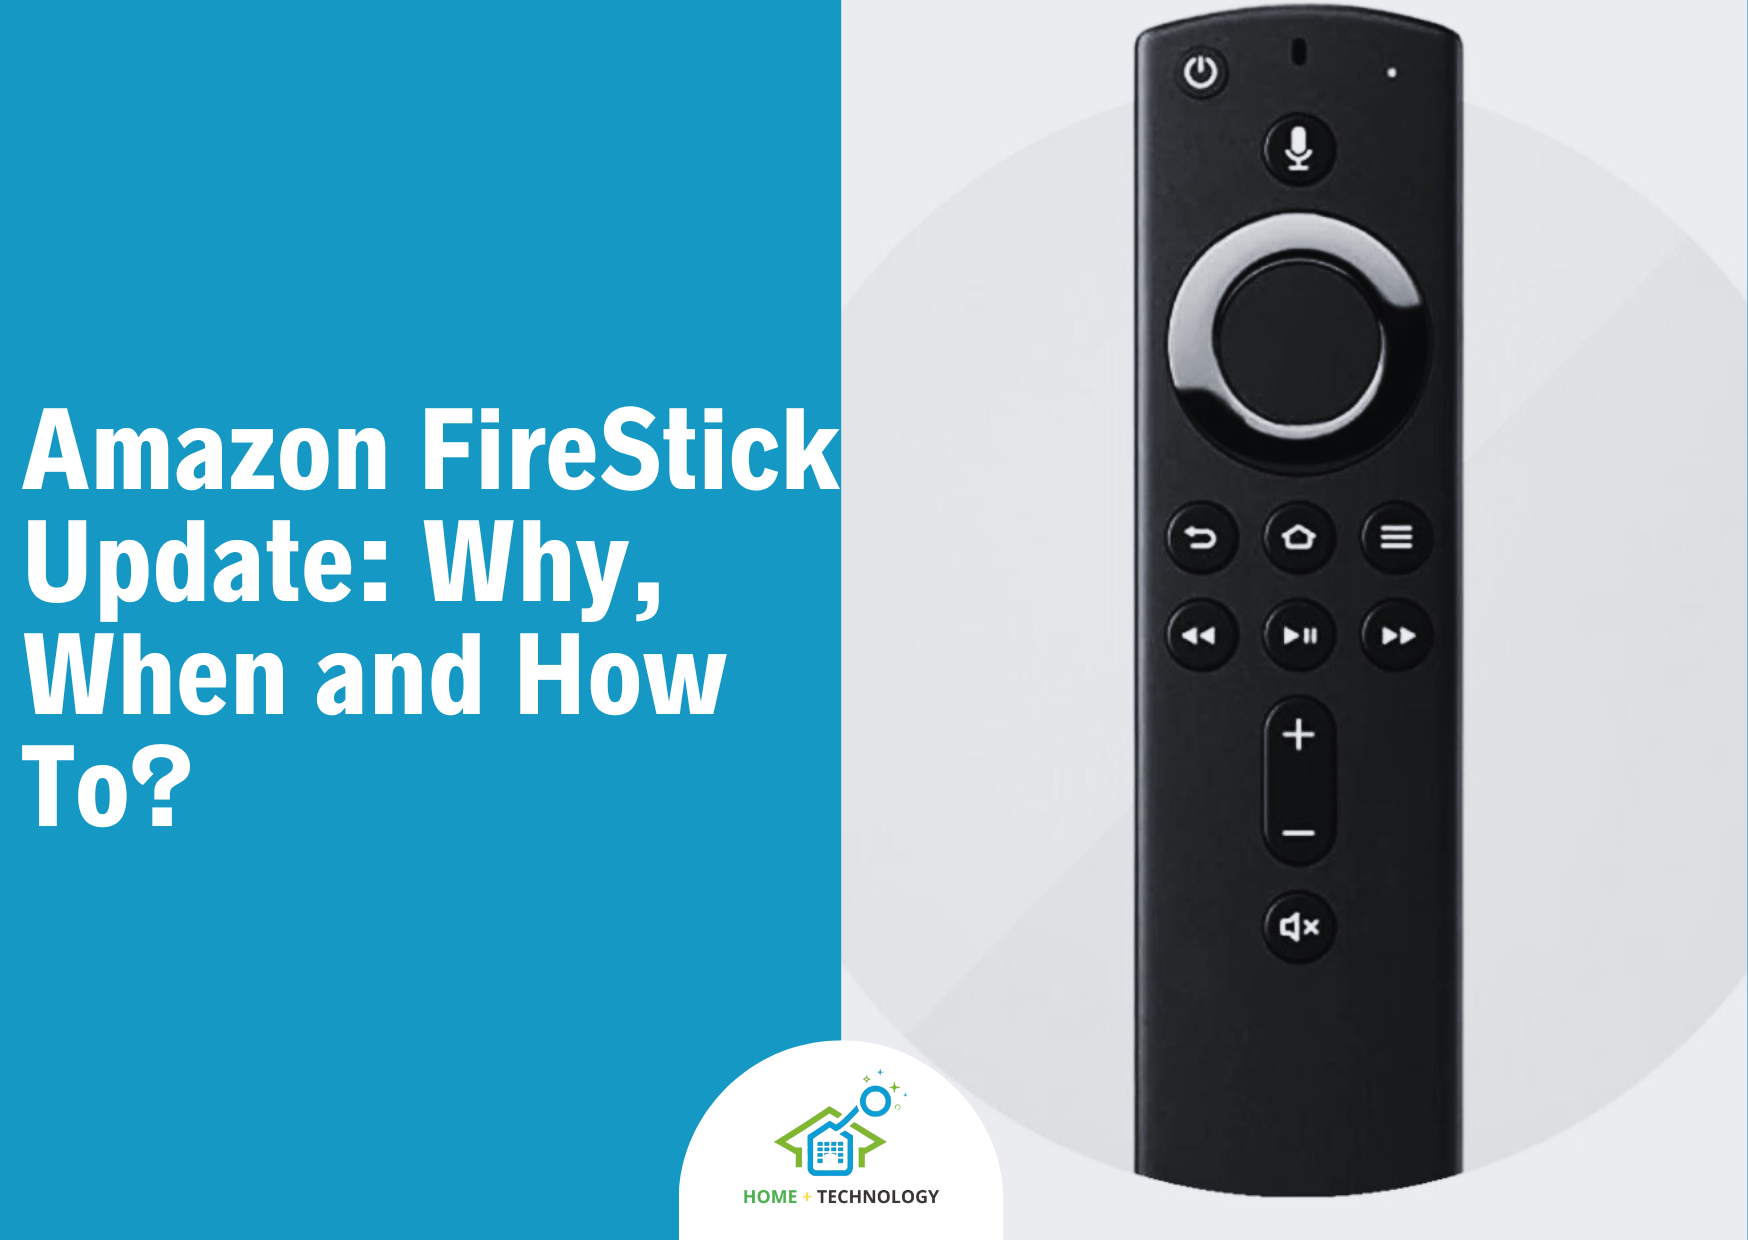 Amazon FireStick Update: Why, When and How To?